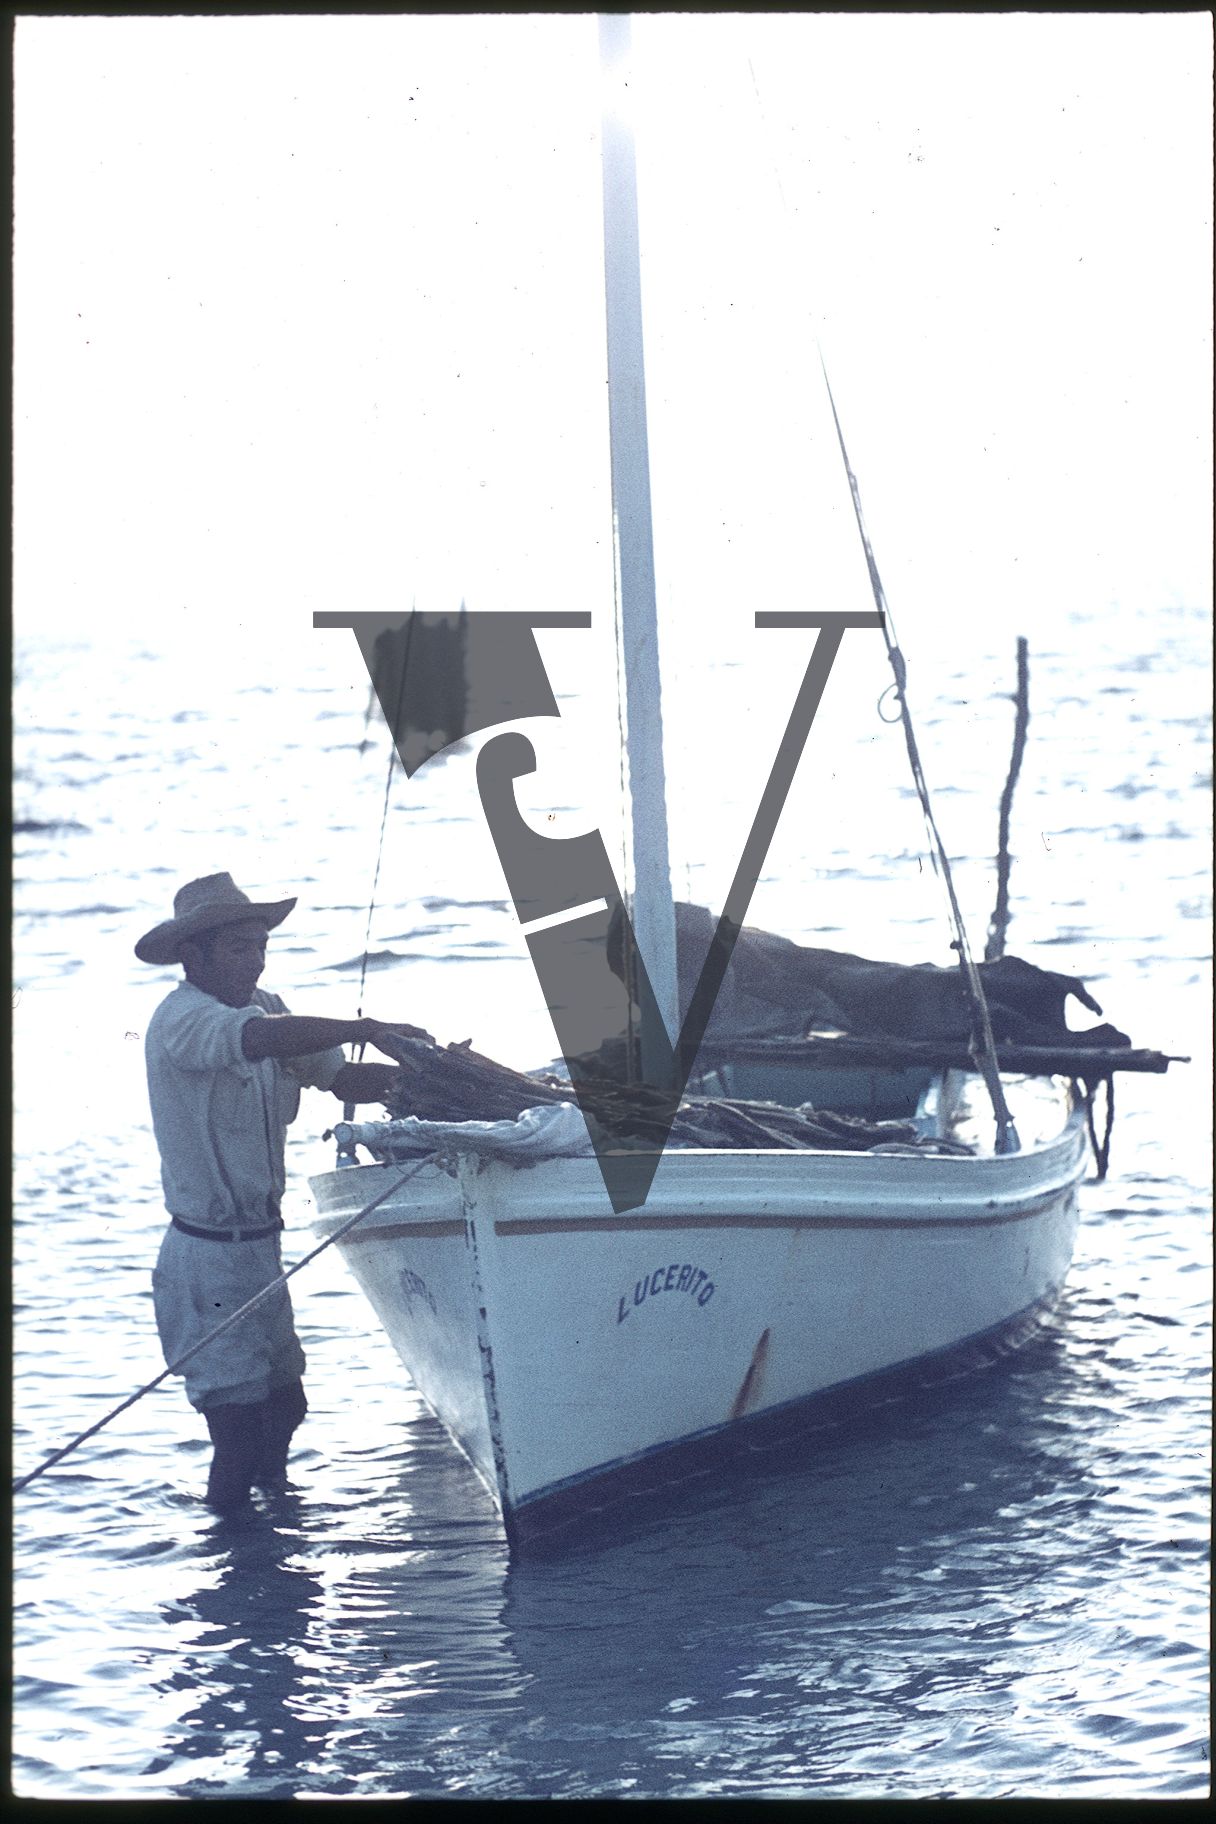 Belize, Ambergris, Man loads small boat in the ocean.